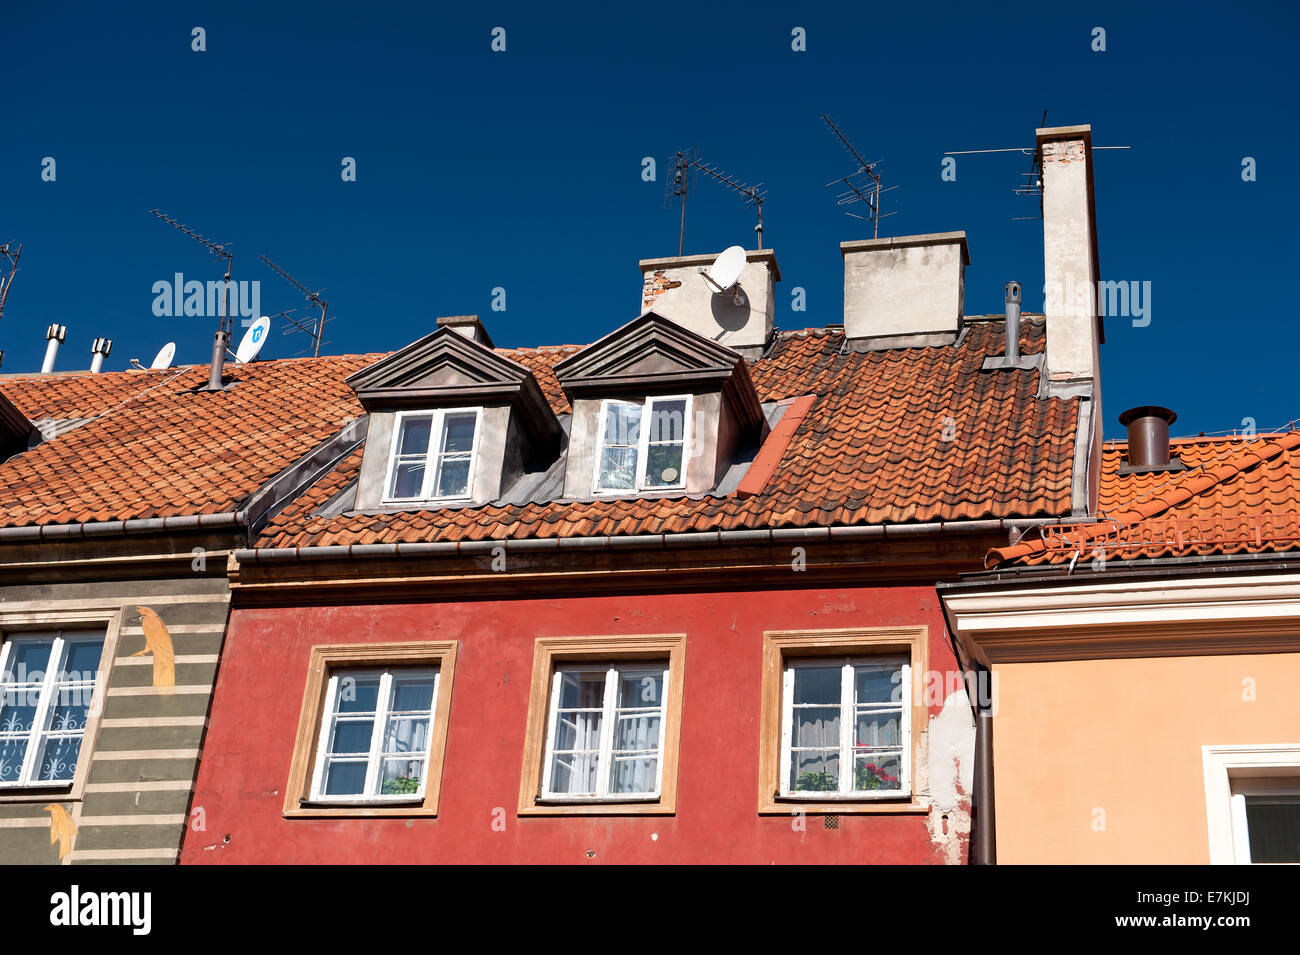 Red pitched roof old building with attic Stock Photo